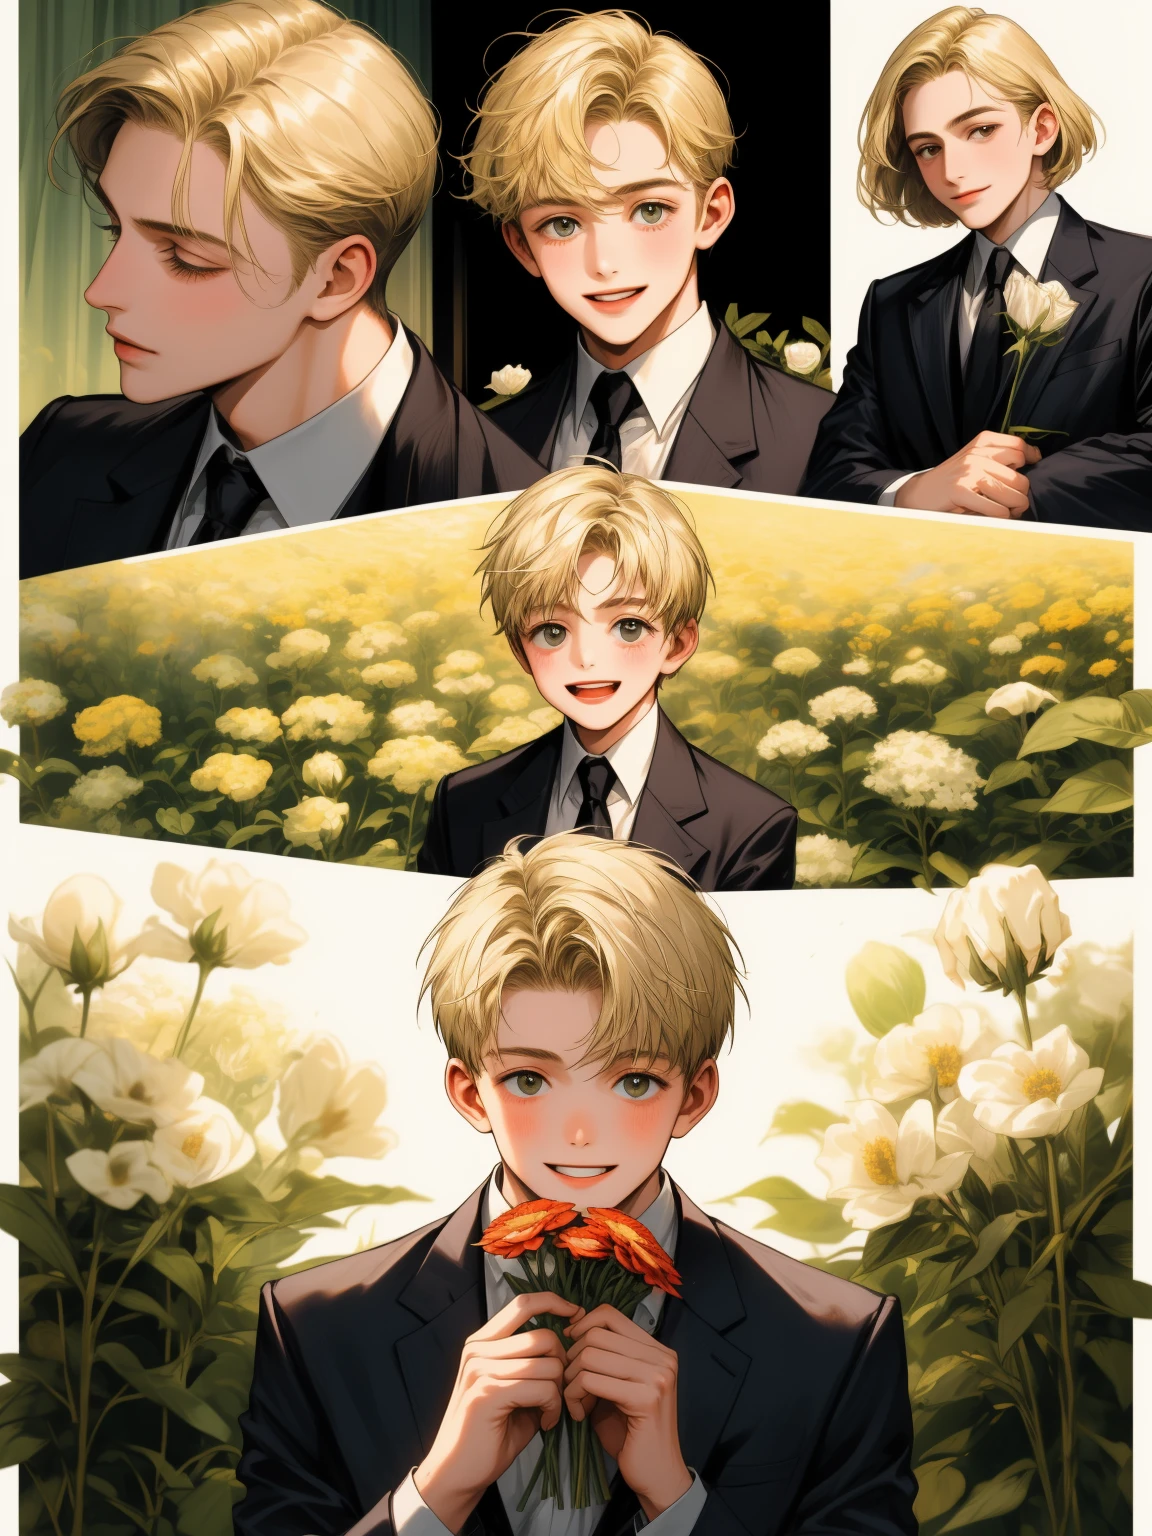 masterpiece, collage of little boy holding flowers, happy, short blond hair